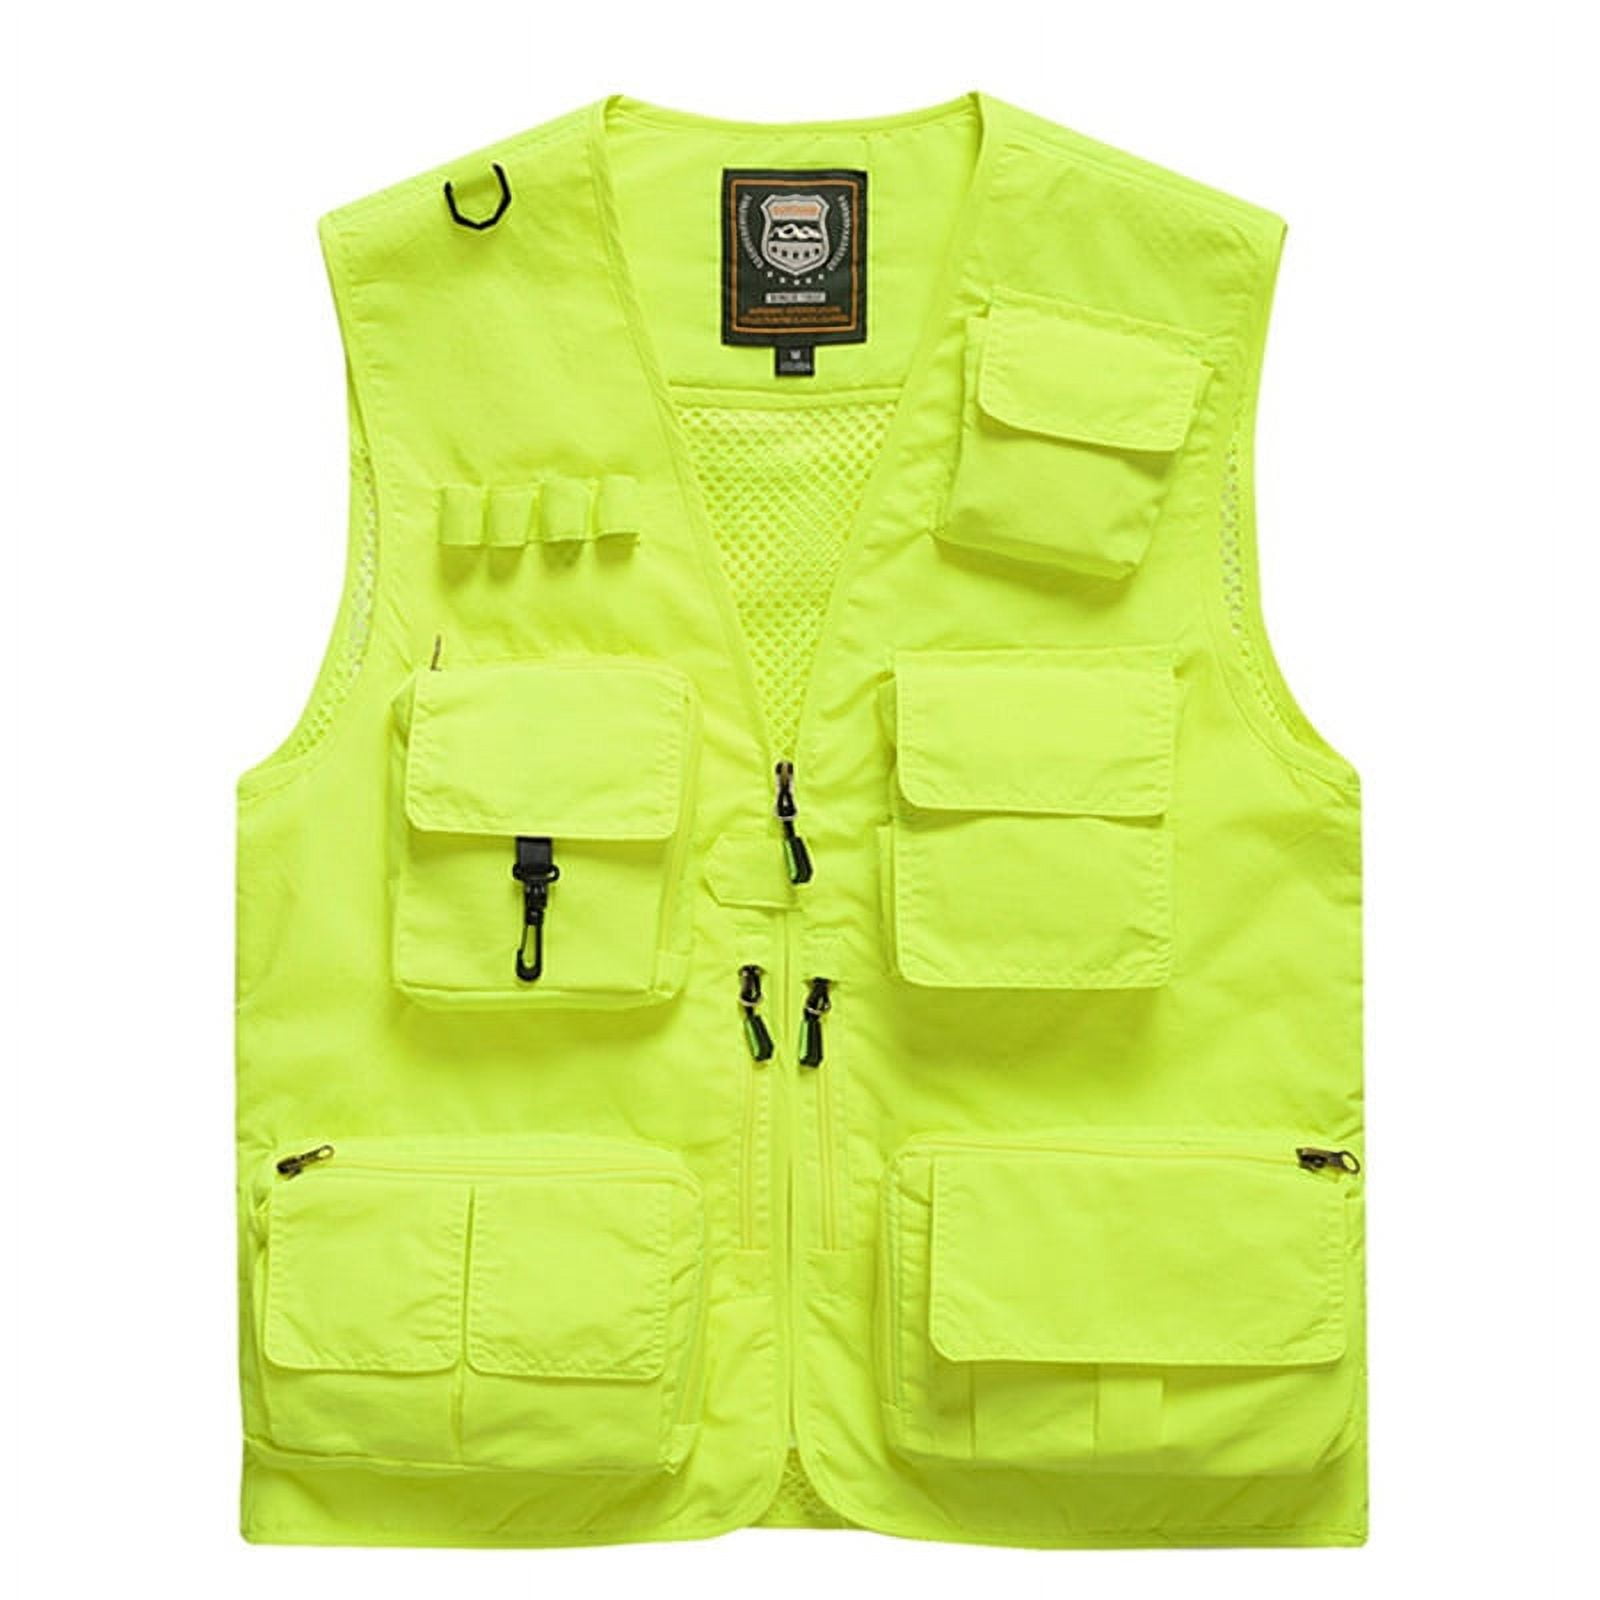 HOTIAN Fishing Vest Jcket for Men and Women Quick-Dry Outdoor Cargo Utility  Vests with Multi-Pocket for Travel Work Photography Neon Green M